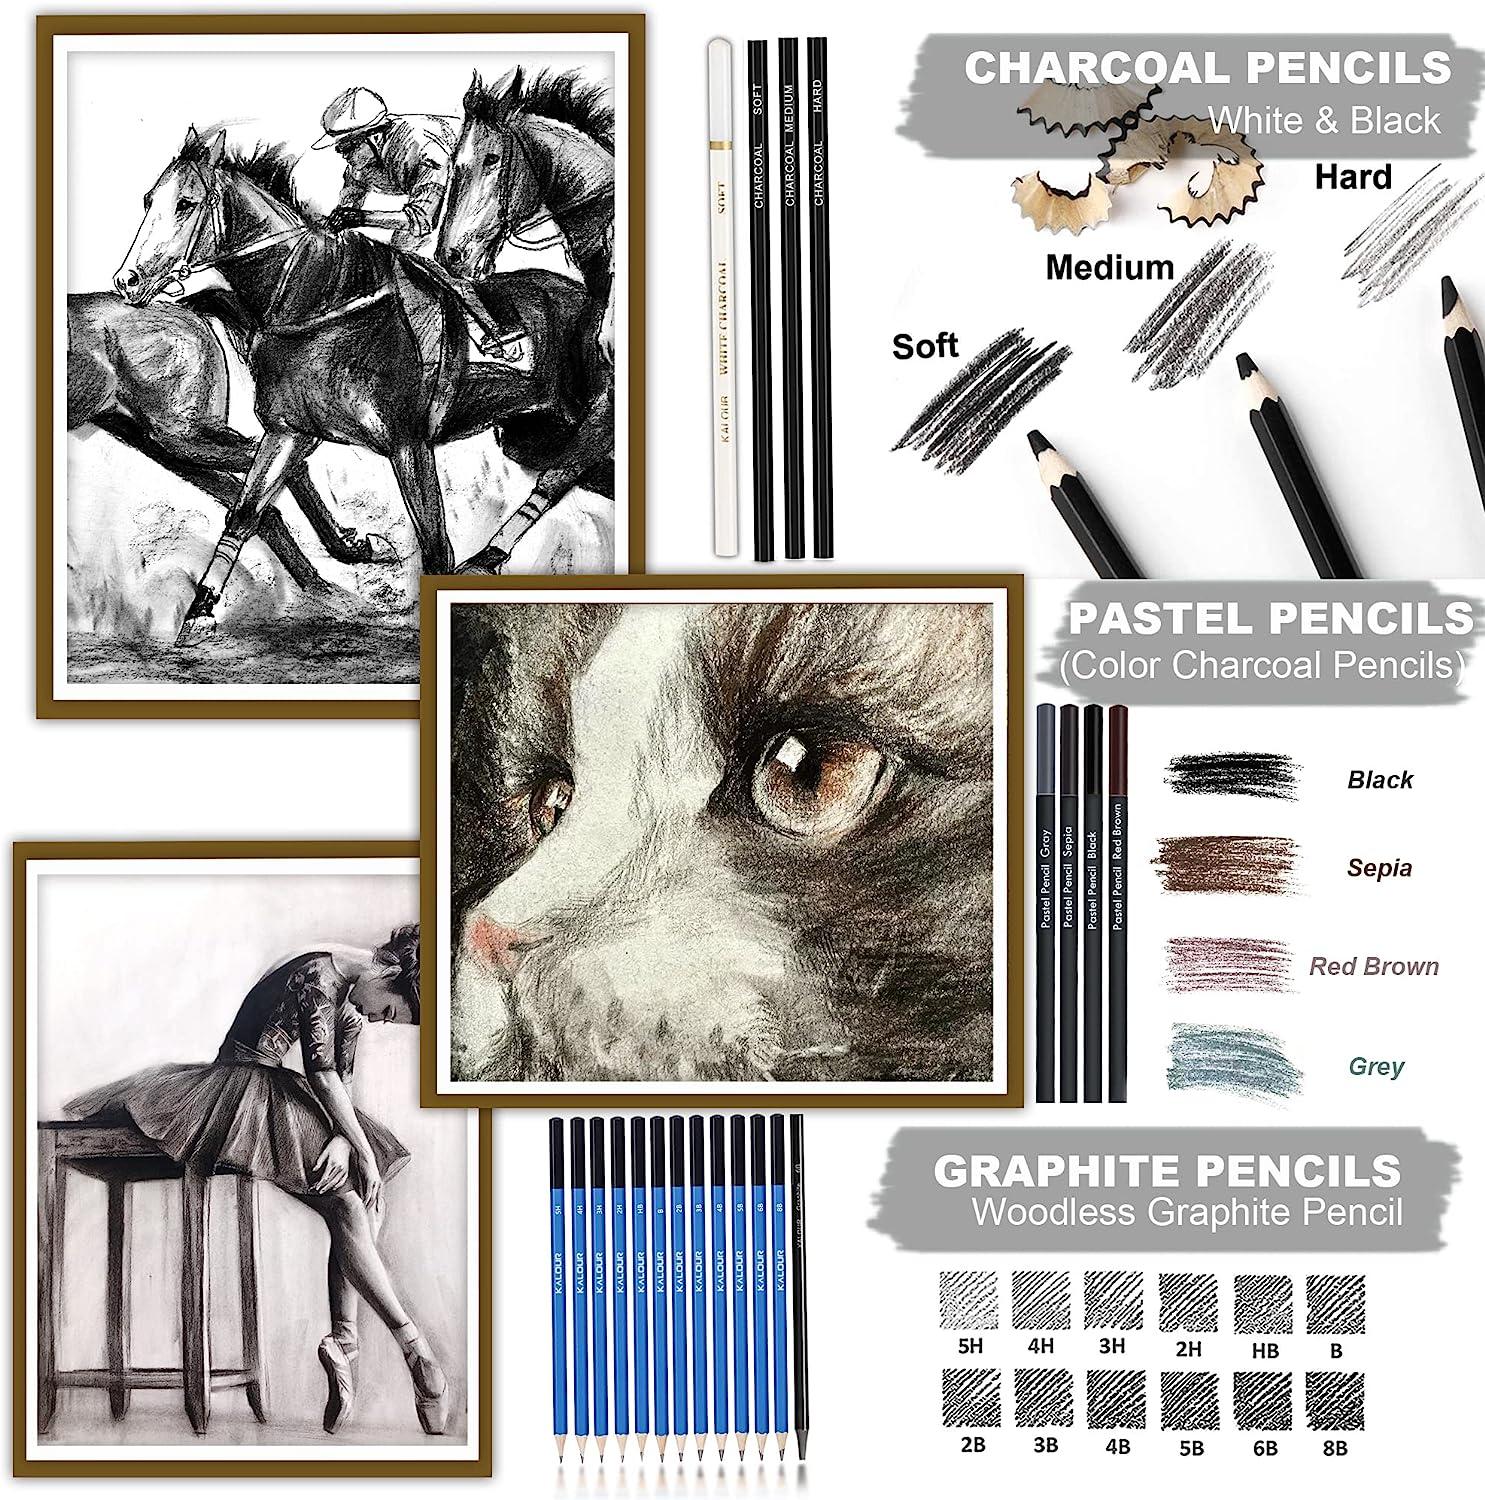 Sketching Drawing Kit Set 72-Piece and 100 Sheet Sketchbook, Art Supplies  for Adults, Teens, Kids, Watercolor & Graphite Drawing Coloring Art Pencils  Set, Artist Supplies Drawing Stuff 